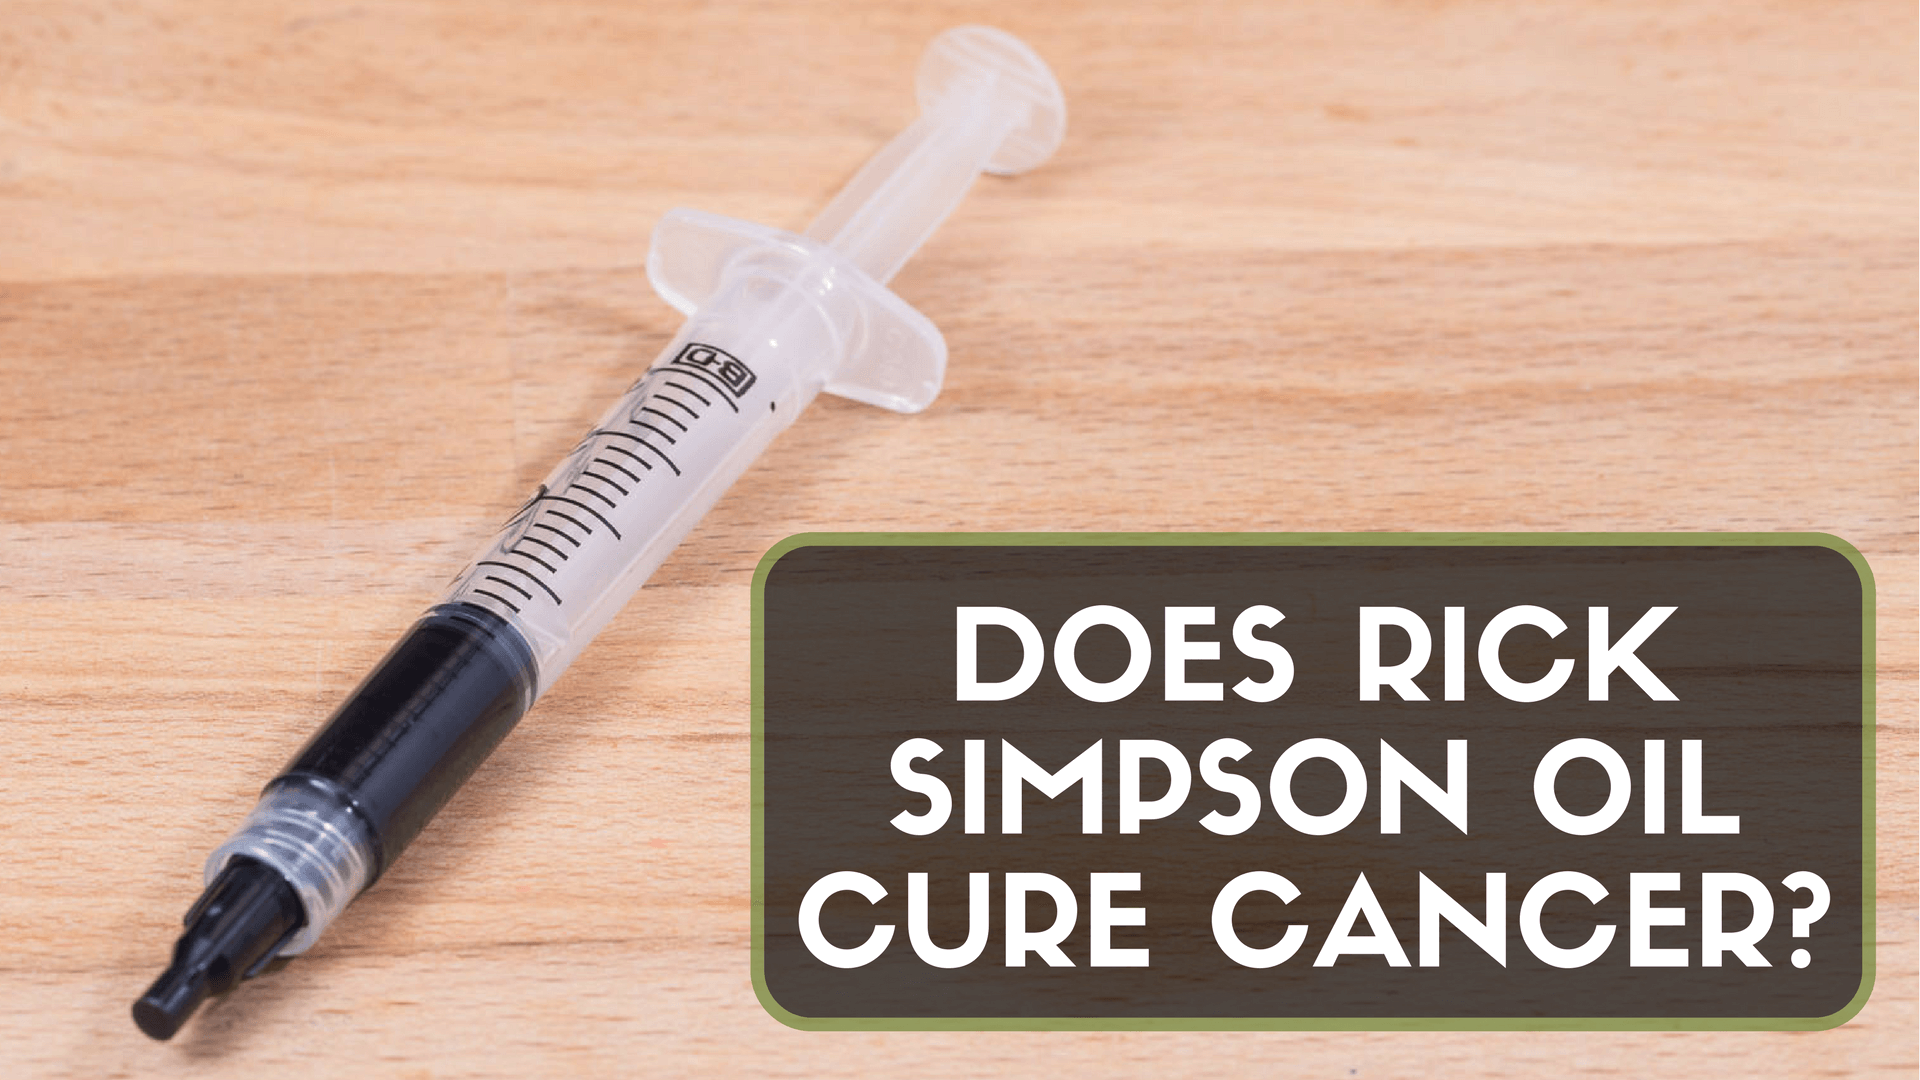 STUDIES THAT SHOW CBD OIL LIKE SIMPSON OIL CAN EFFECTIVELY TREAT CANCER